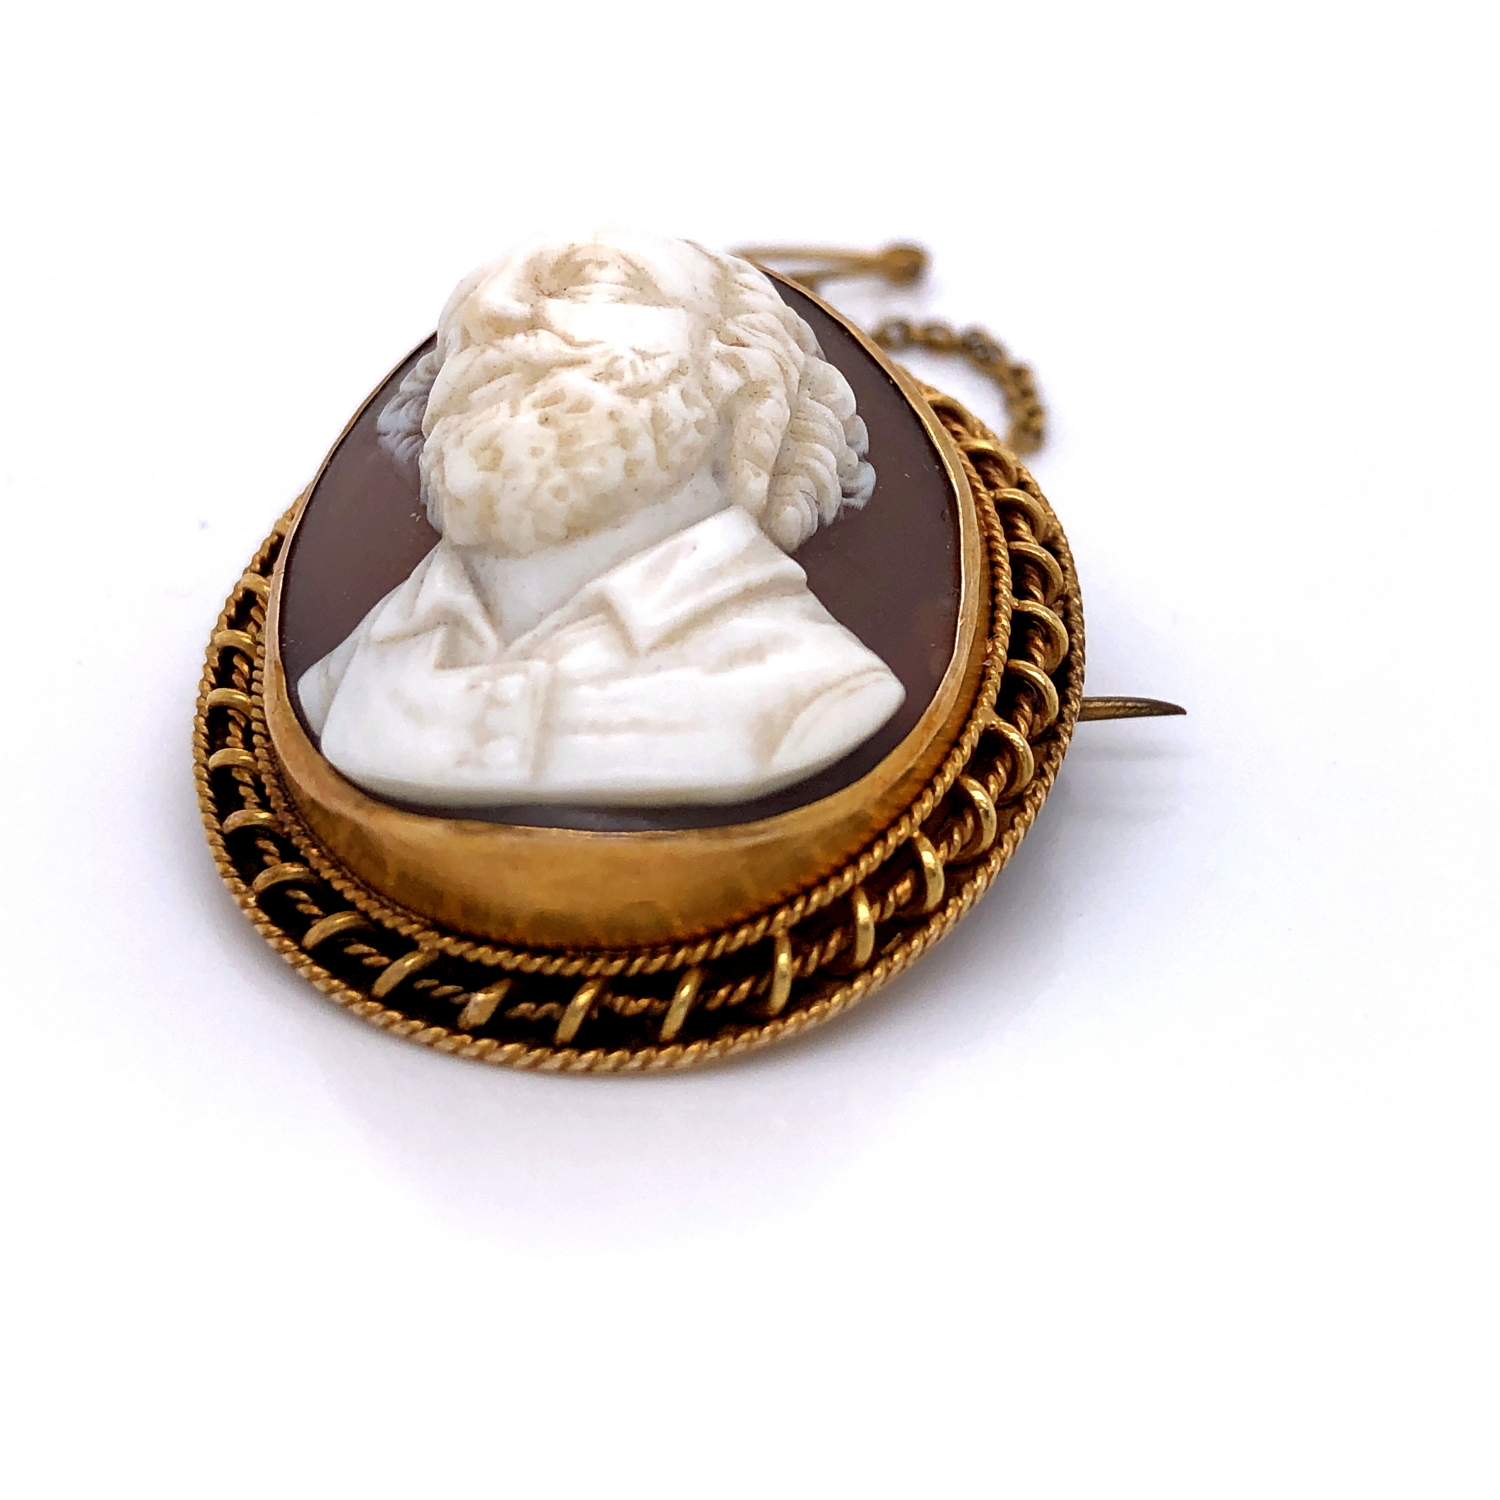 A PORTRAIT CAMEO, POSSIBLY WILLIAM SHAKESPEARE WITH A GLAZED BACK, MOUNTED IN A YELLOW METAL ROPE - Image 11 of 13